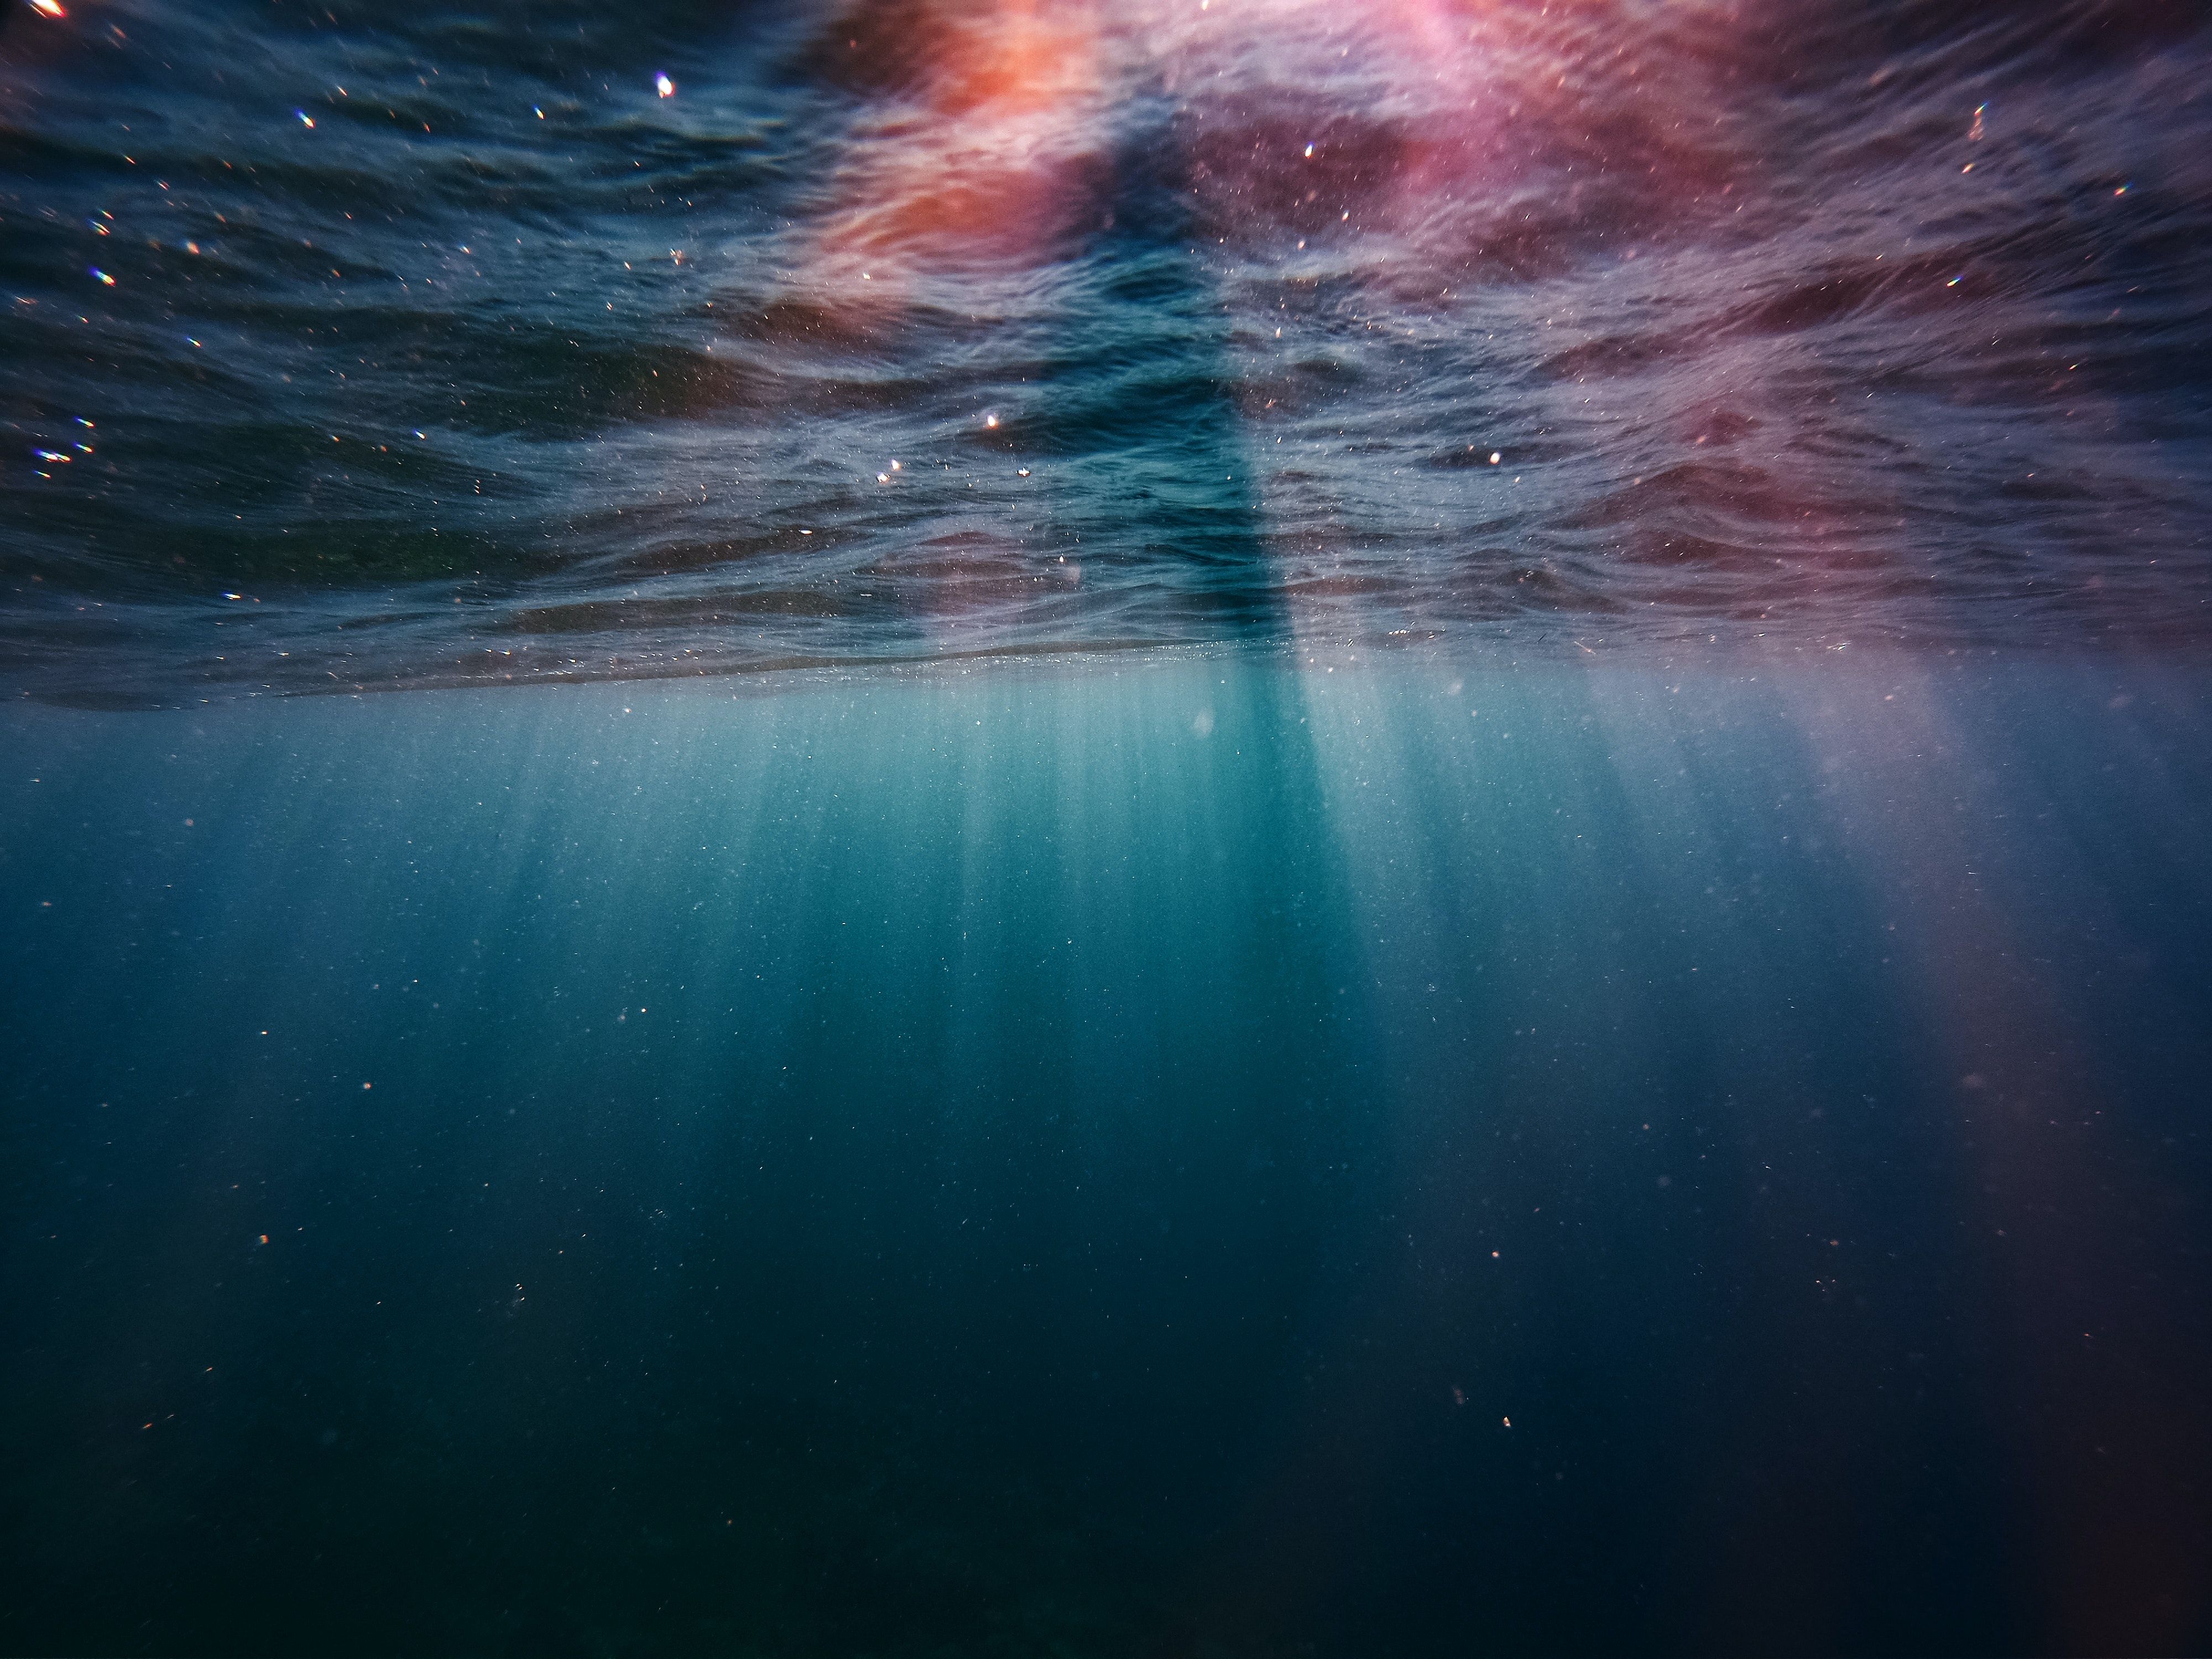 A person swimming underwater with sunlight shining through the water's surface - Underwater